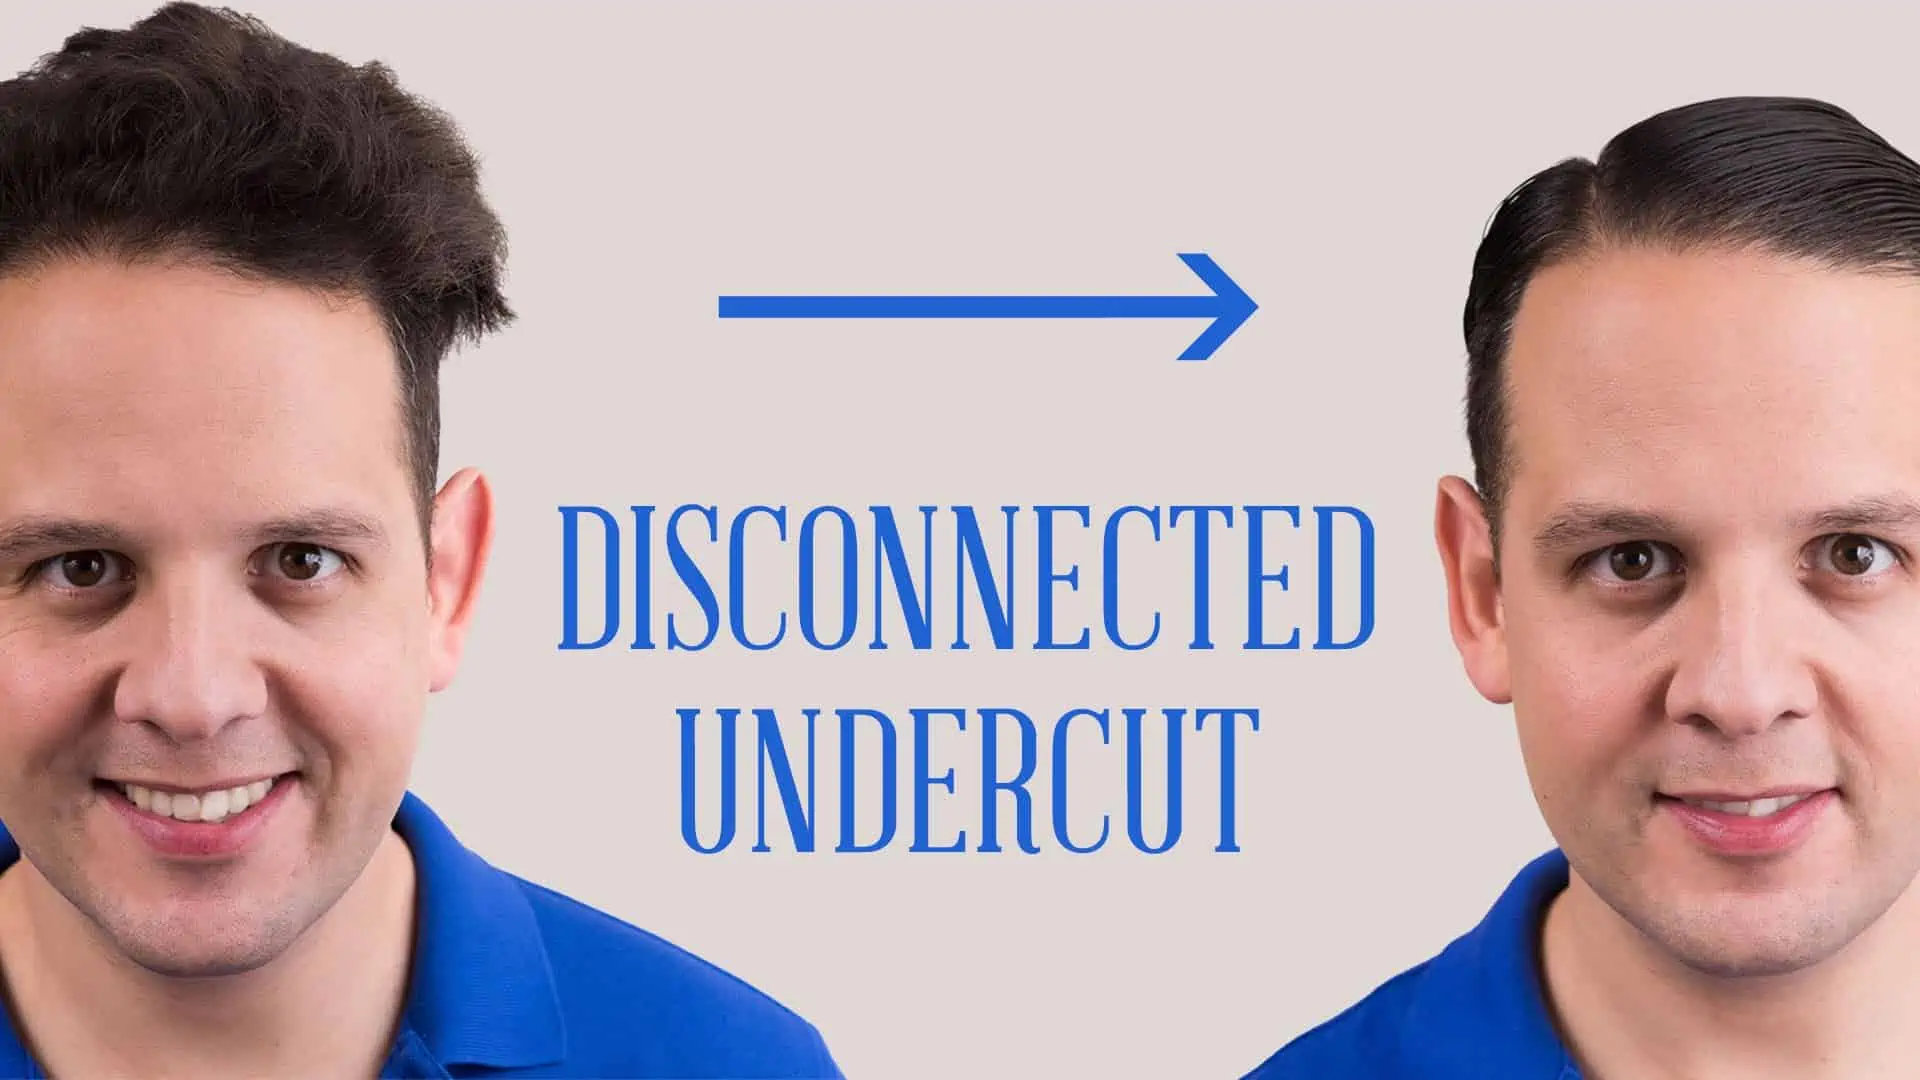 Disconnected Undercut %E2%80%93 How To Style Hair The Gentlemans Gazette Way